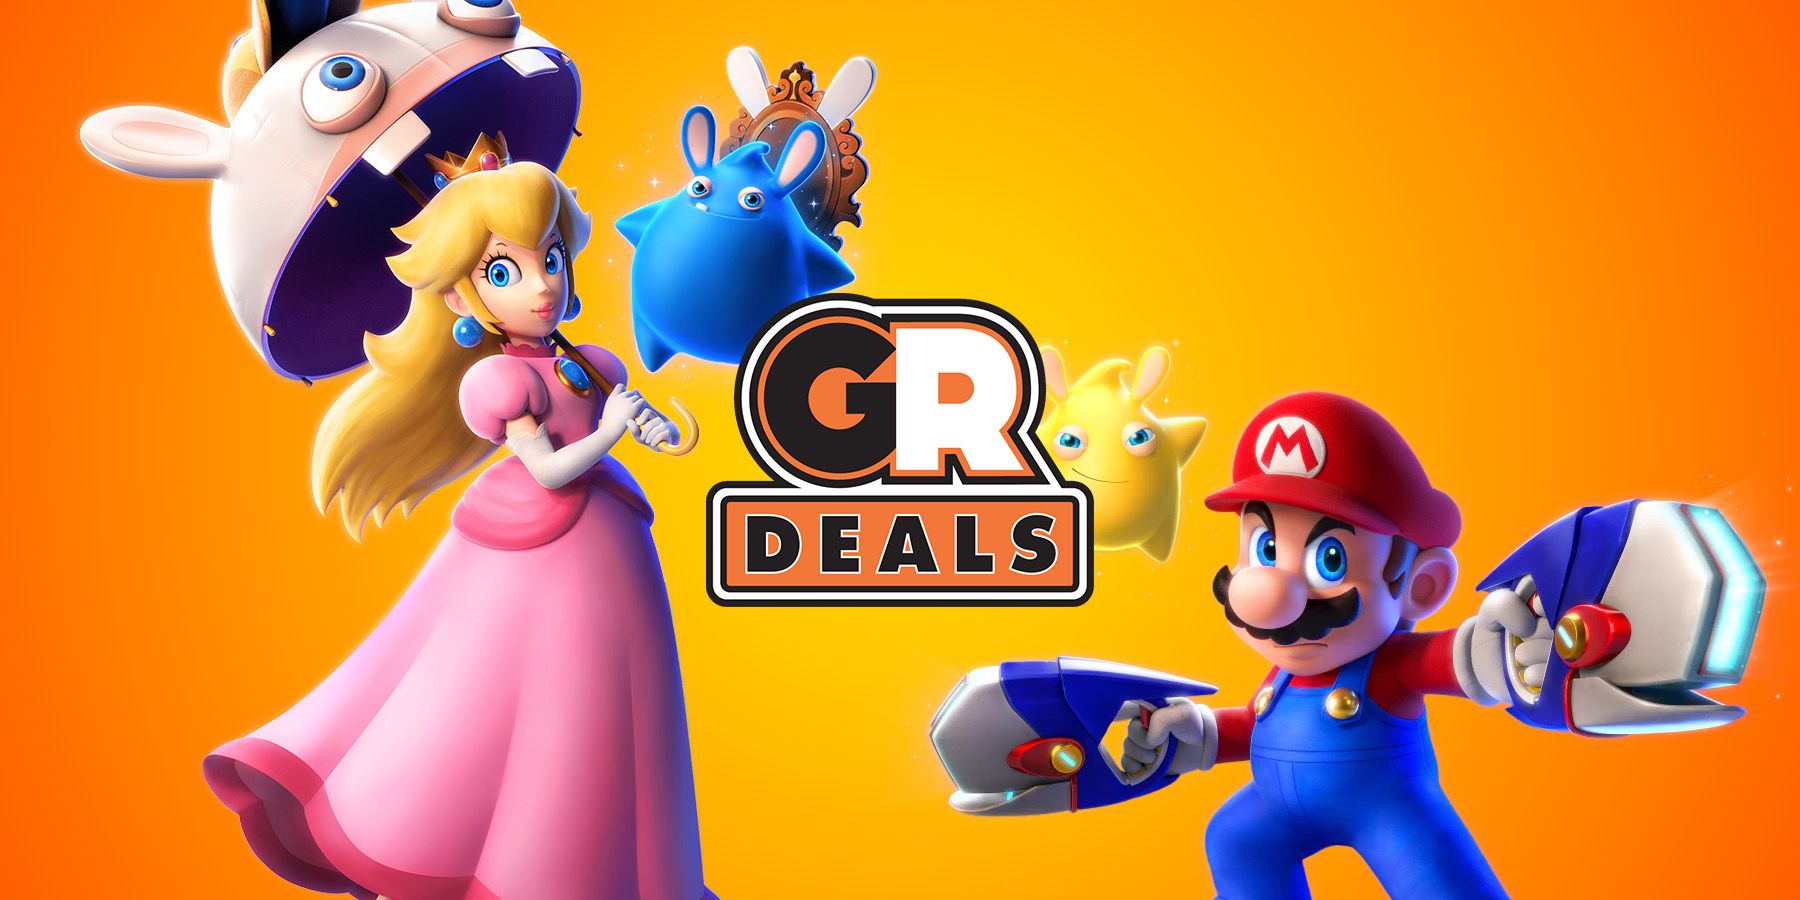 Daily Deals: PS5 In Stock, Mario + Rabbids: Sparks of Hope for $32